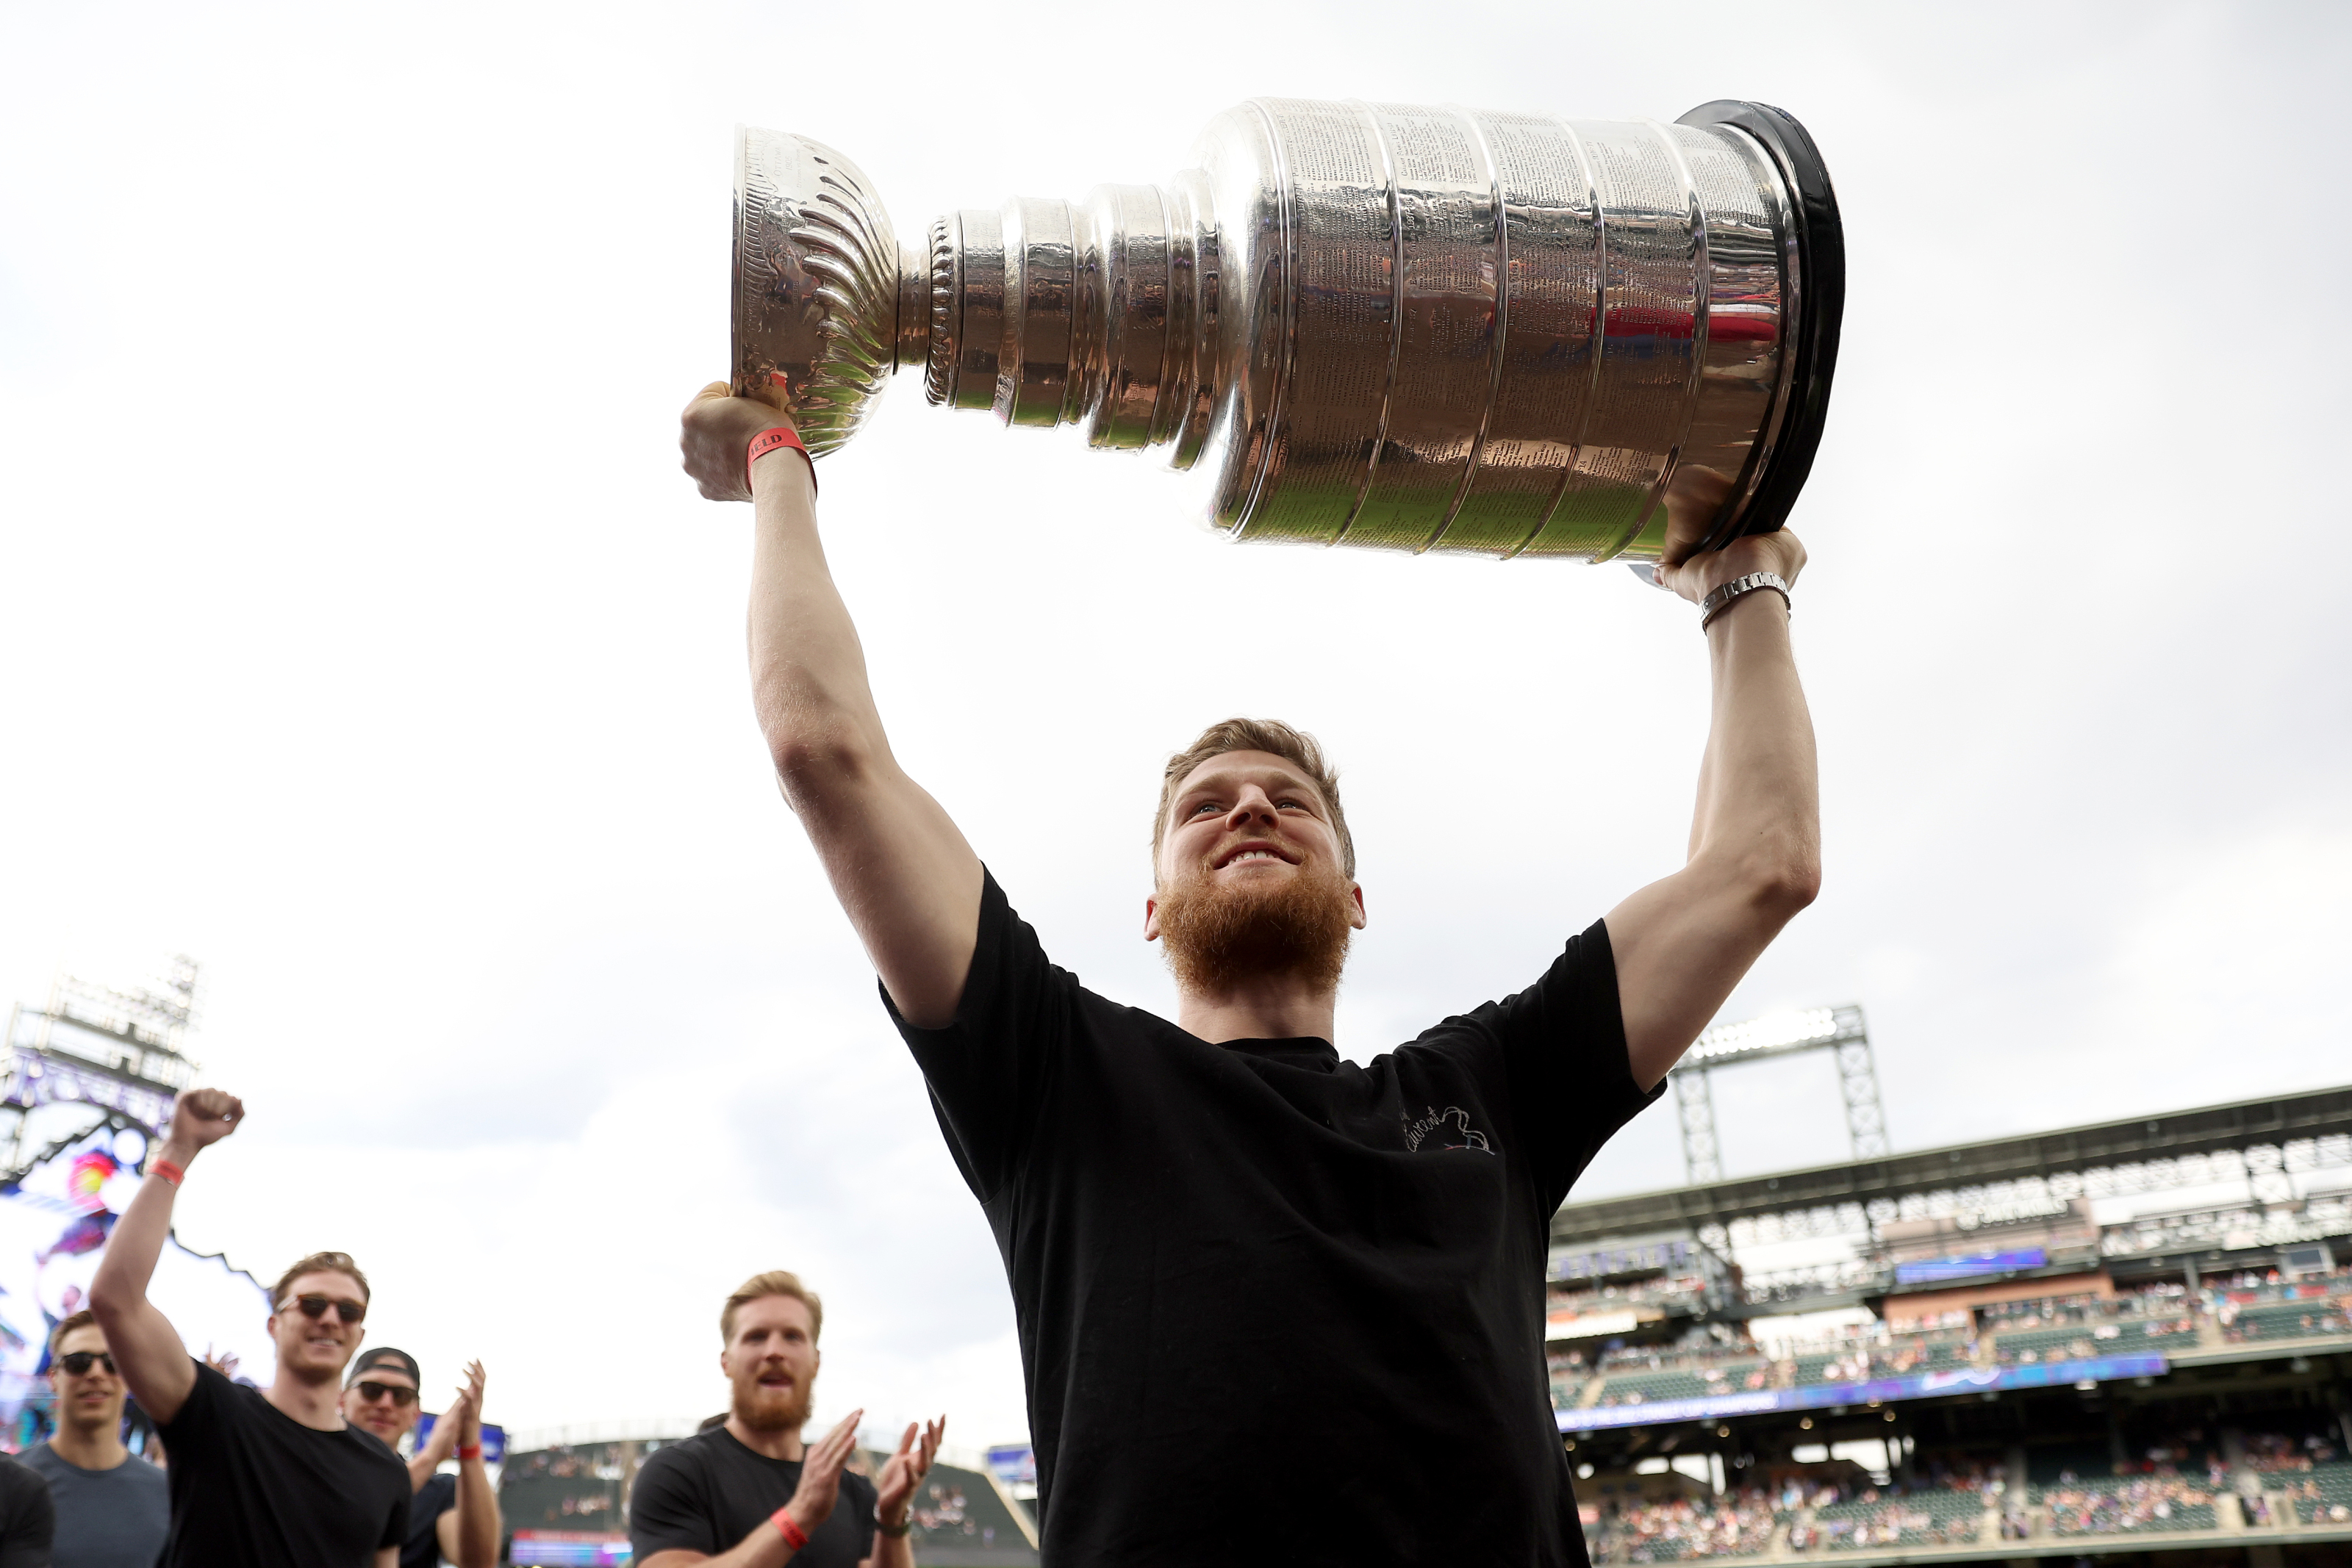 MacKinnon's Day with the Stanley Cup 